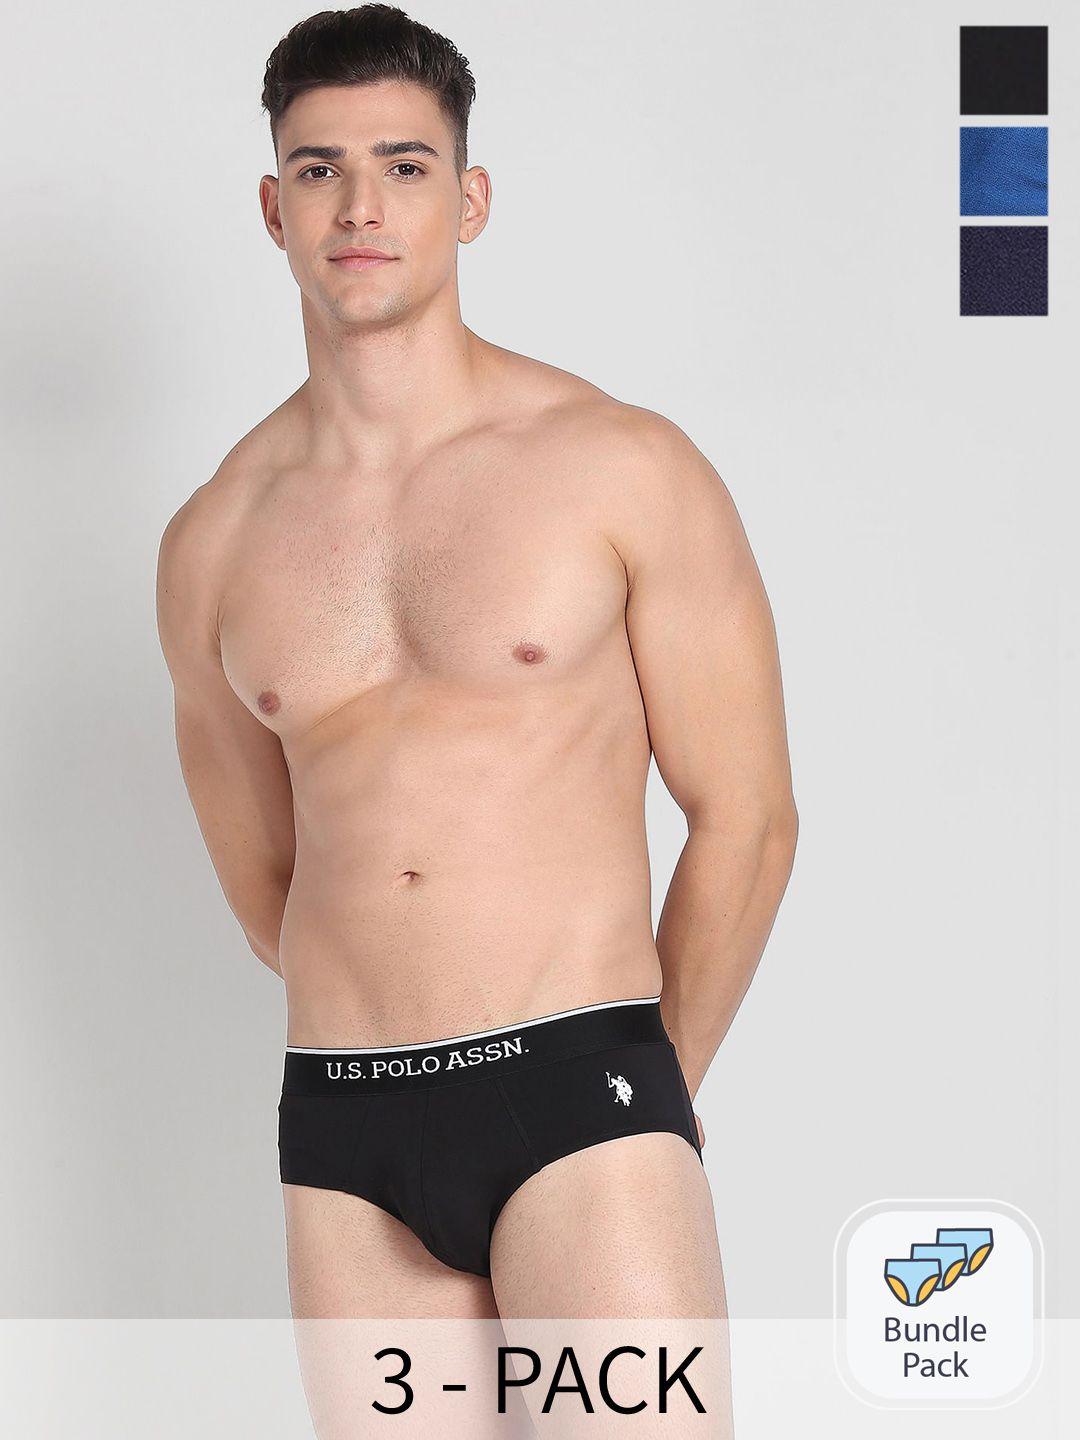 u.s.-polo-assn.-pack-of-3-mid-rise-basic-briefs-eb004-zbn-p3